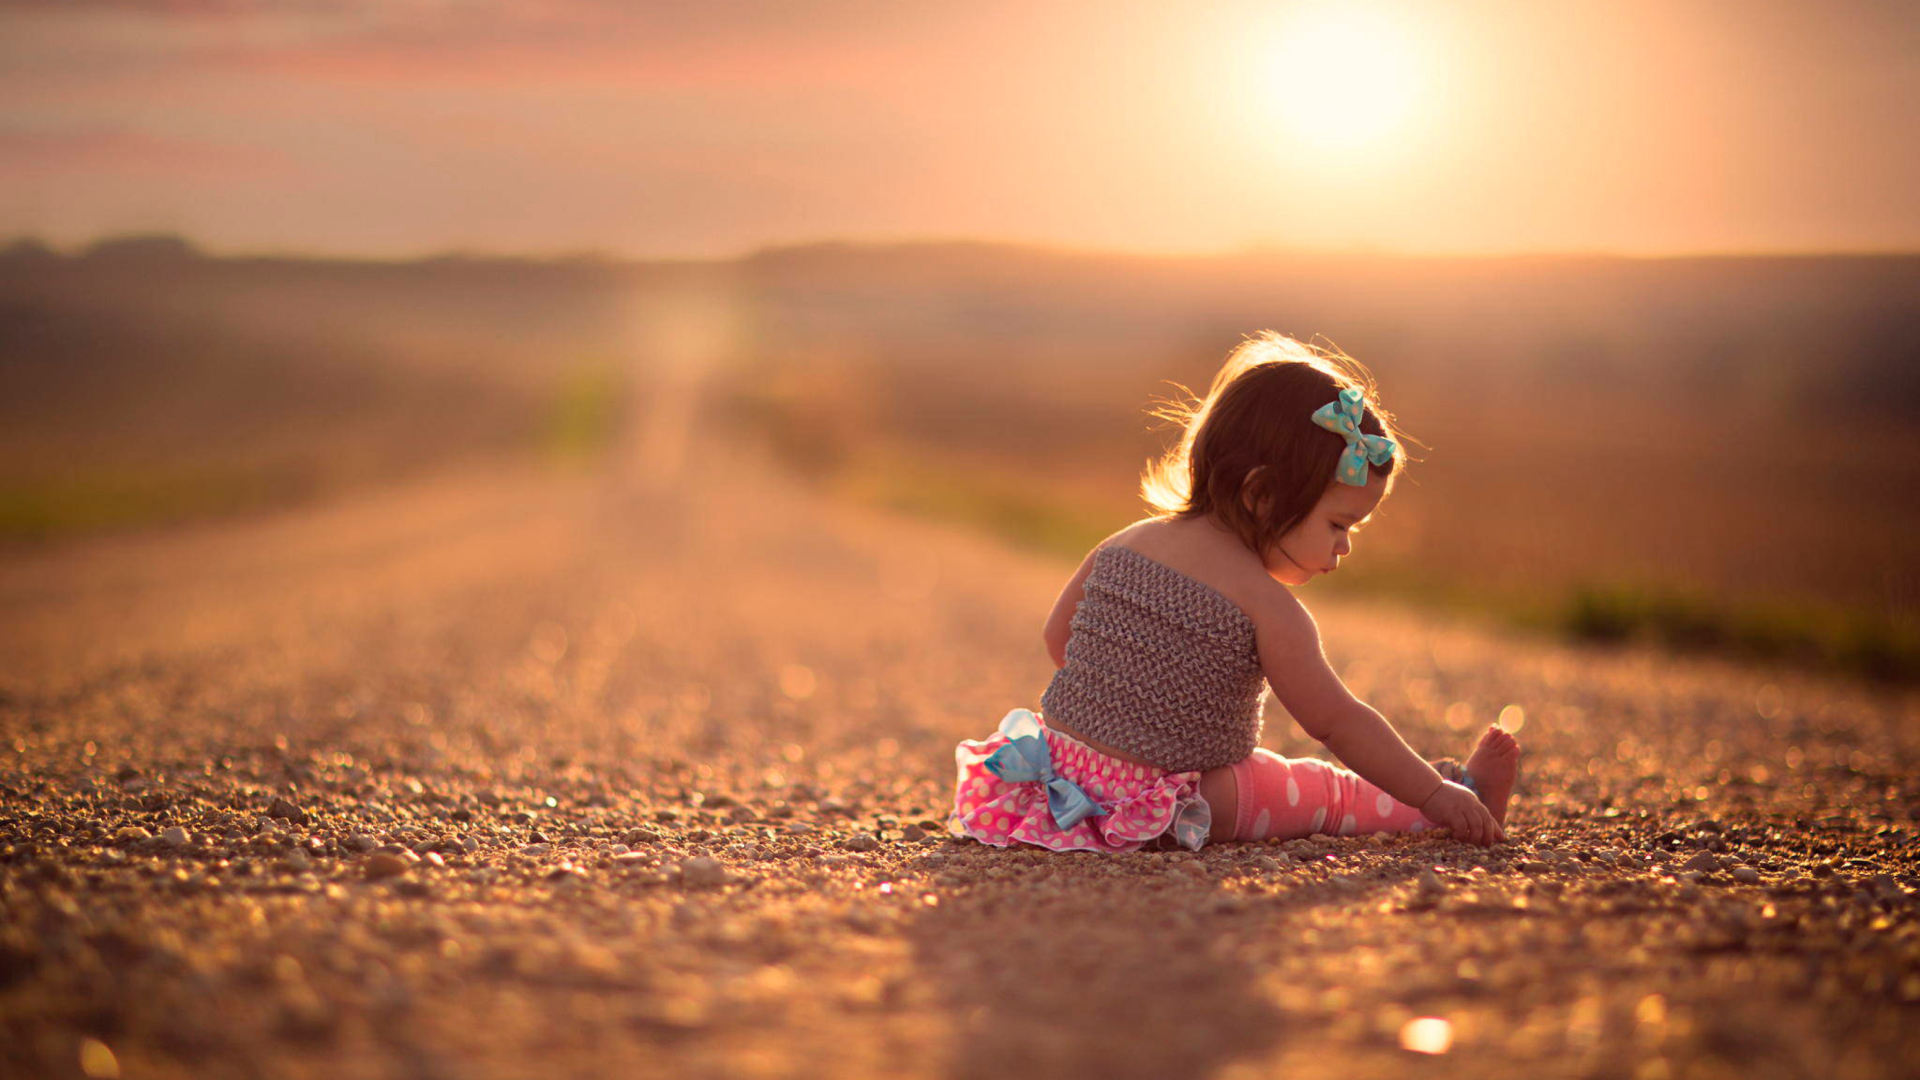 Das Child On Road At Sunset Wallpaper 1920x1080